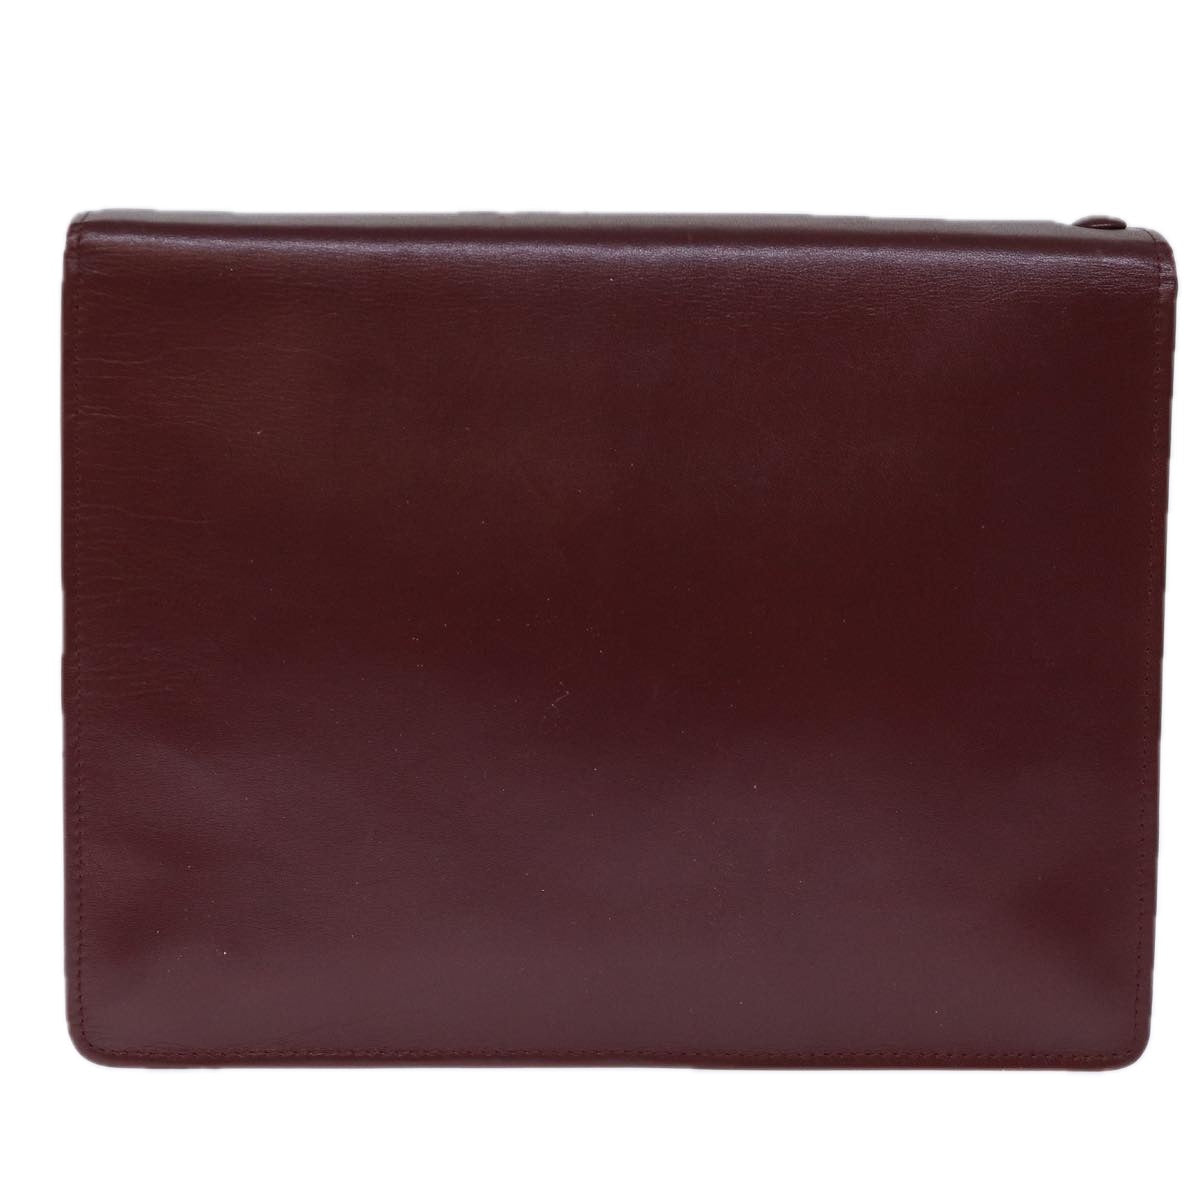 CARTIER Clutch Bag Leather Wine Red Auth bs13974 - 0